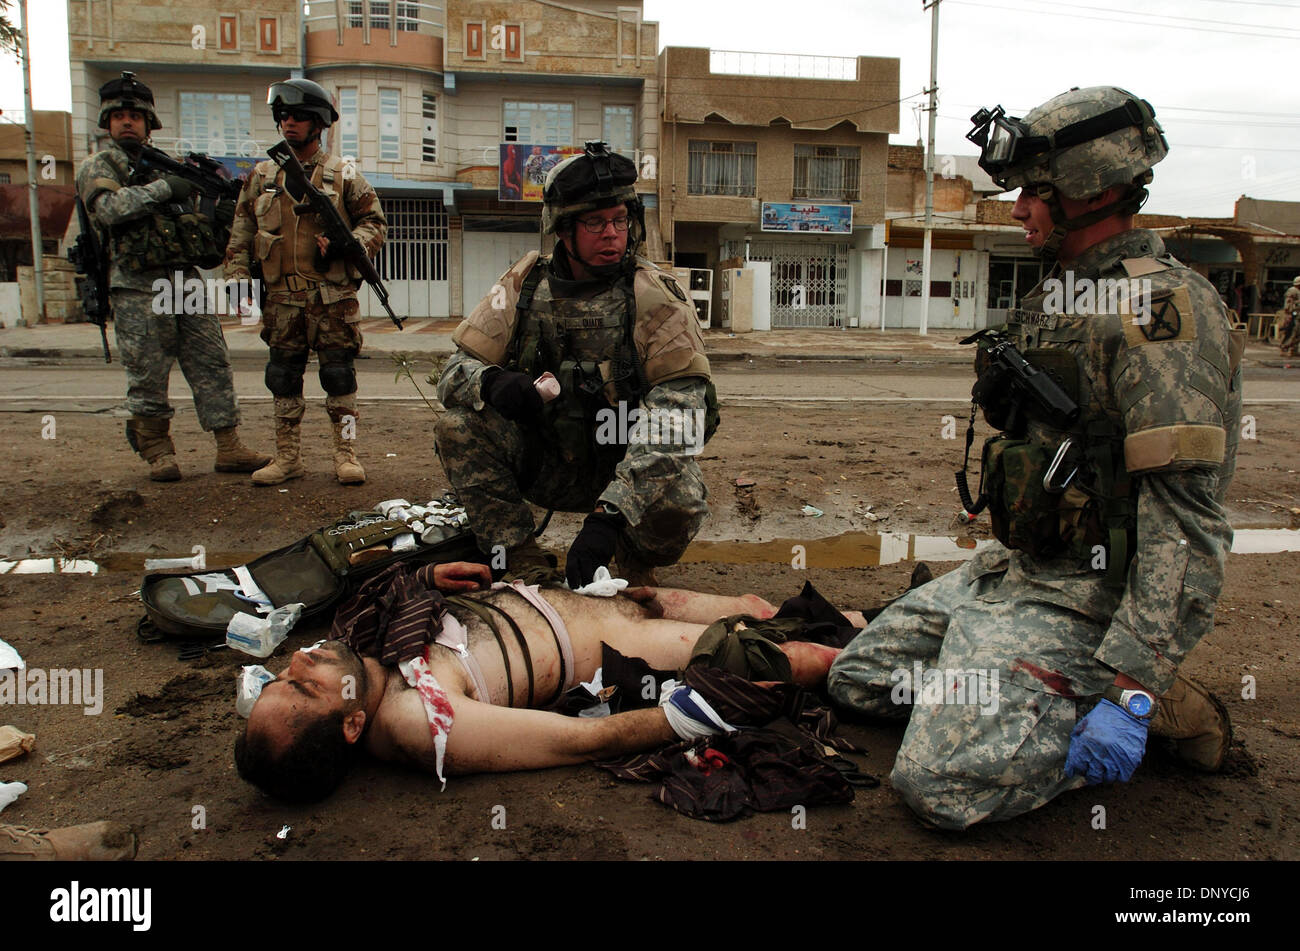 Jan 26, 2006; Abu Ghraib, Baghdad, IRAQ; American soldiers look after a wounded insurgent in Baghdad on Jan. 26, 2006. The insurgent was shot 20 times during a gun battle between American soldiers and a car of four insurgents. Iraqi Ministry of Defense identification cards and drug-filled syringes were found in the car along with four AK-47s, one PKM machine gun, one RPG launcher,  Stock Photo